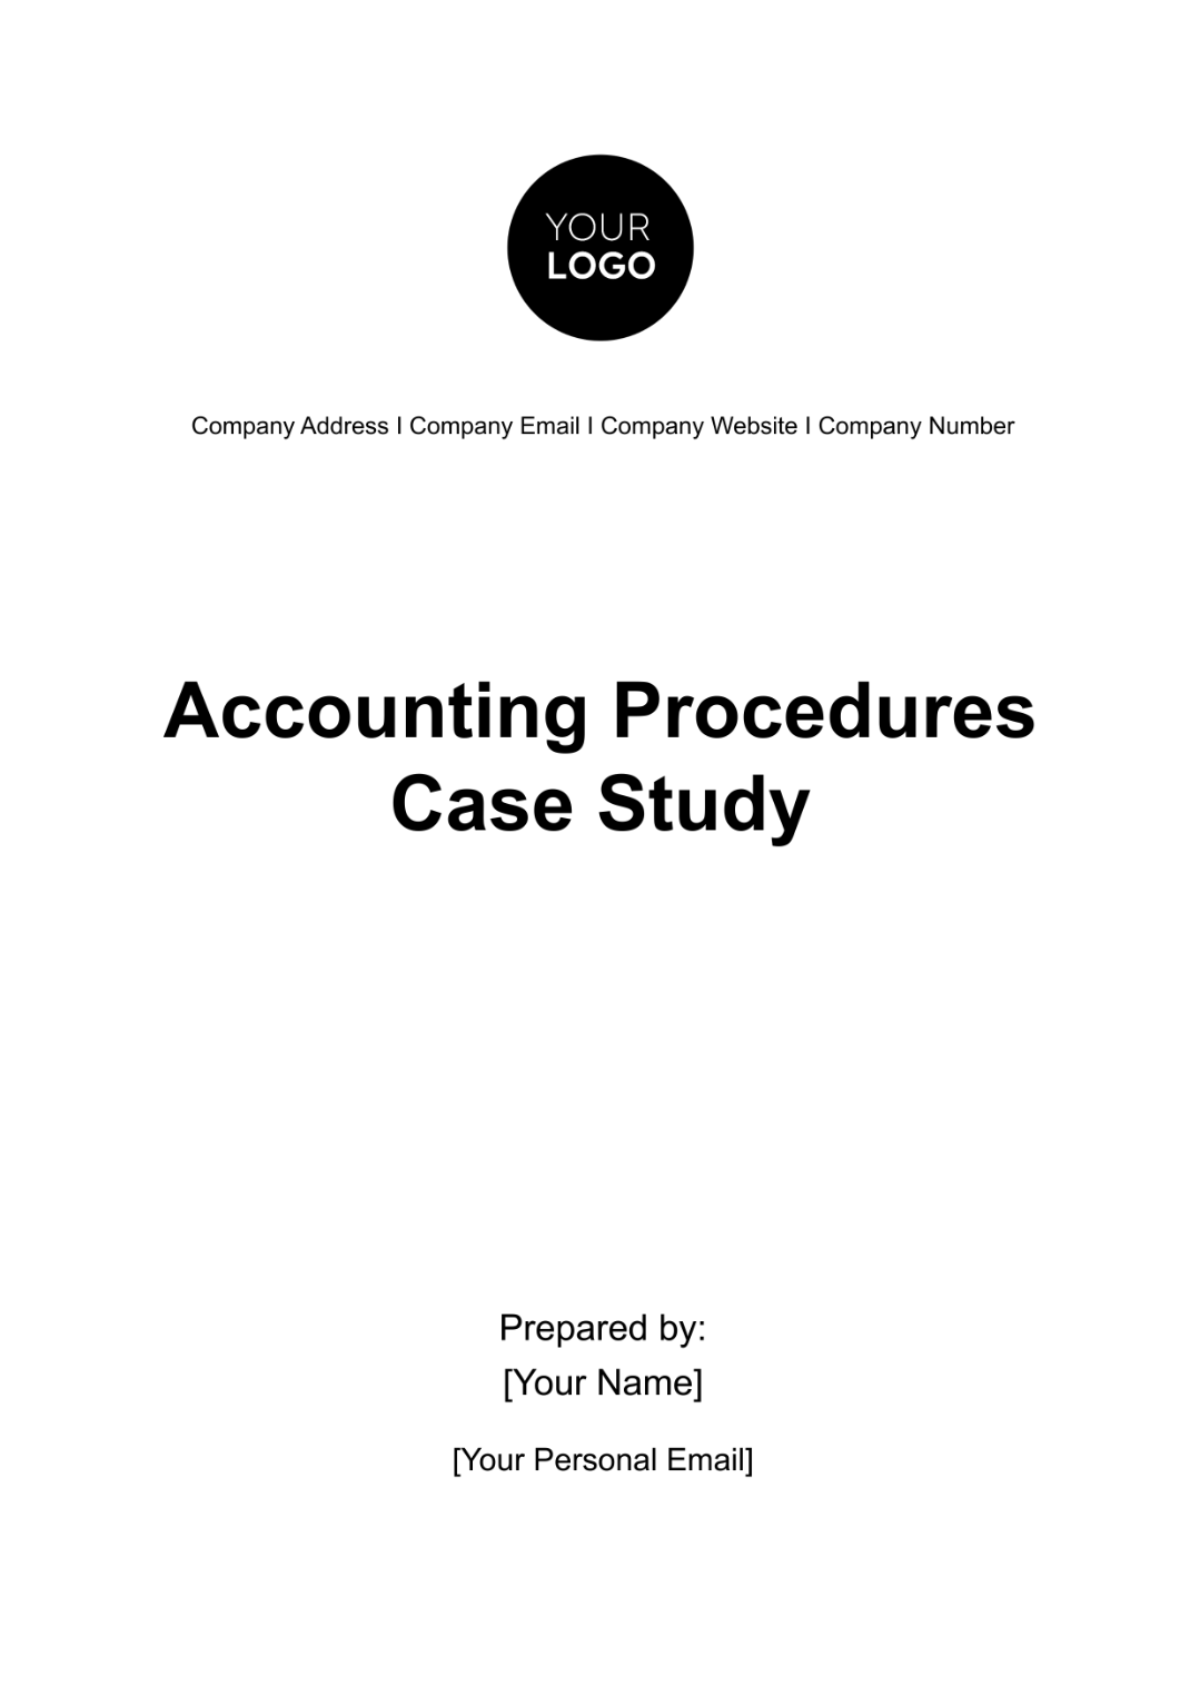 Accounting Procedures Case Study Template